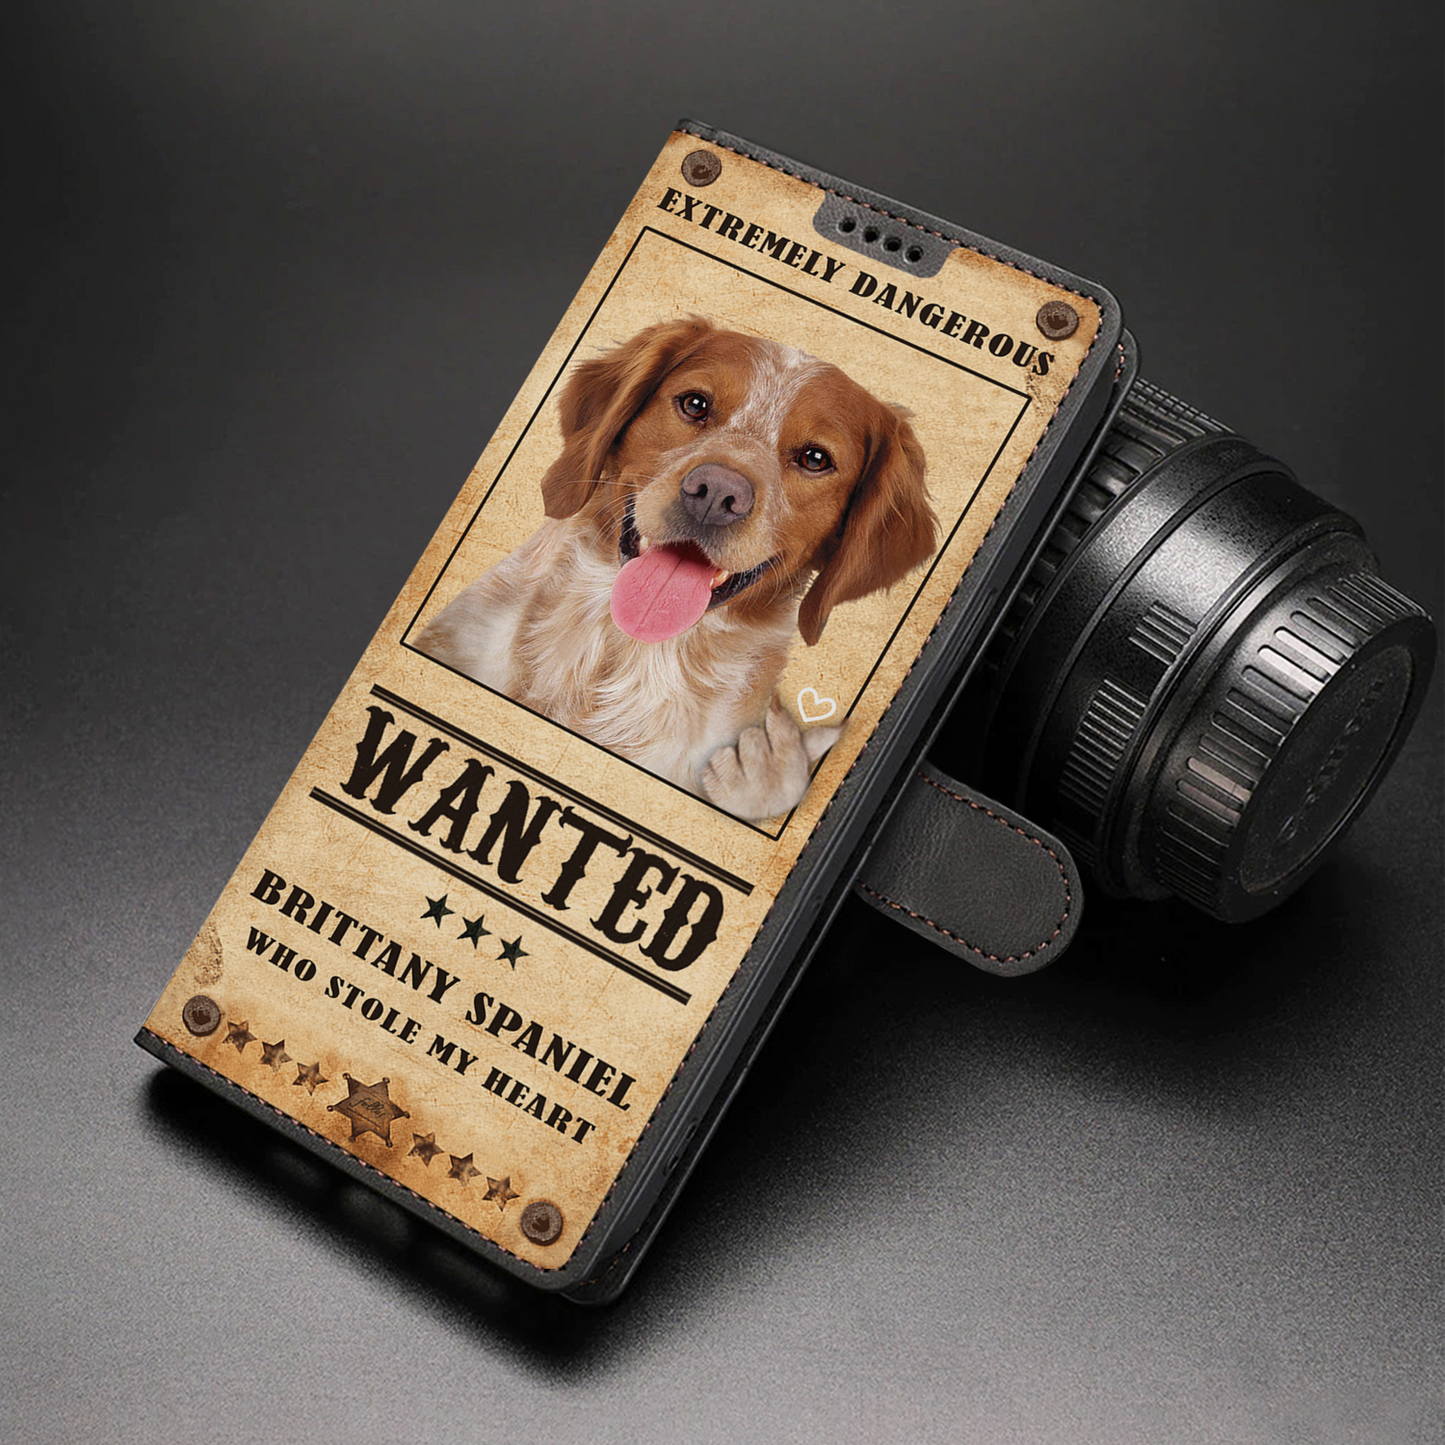 Heart Thief Brittany Spaniel - Love Inspired Wallet Phone Case V1